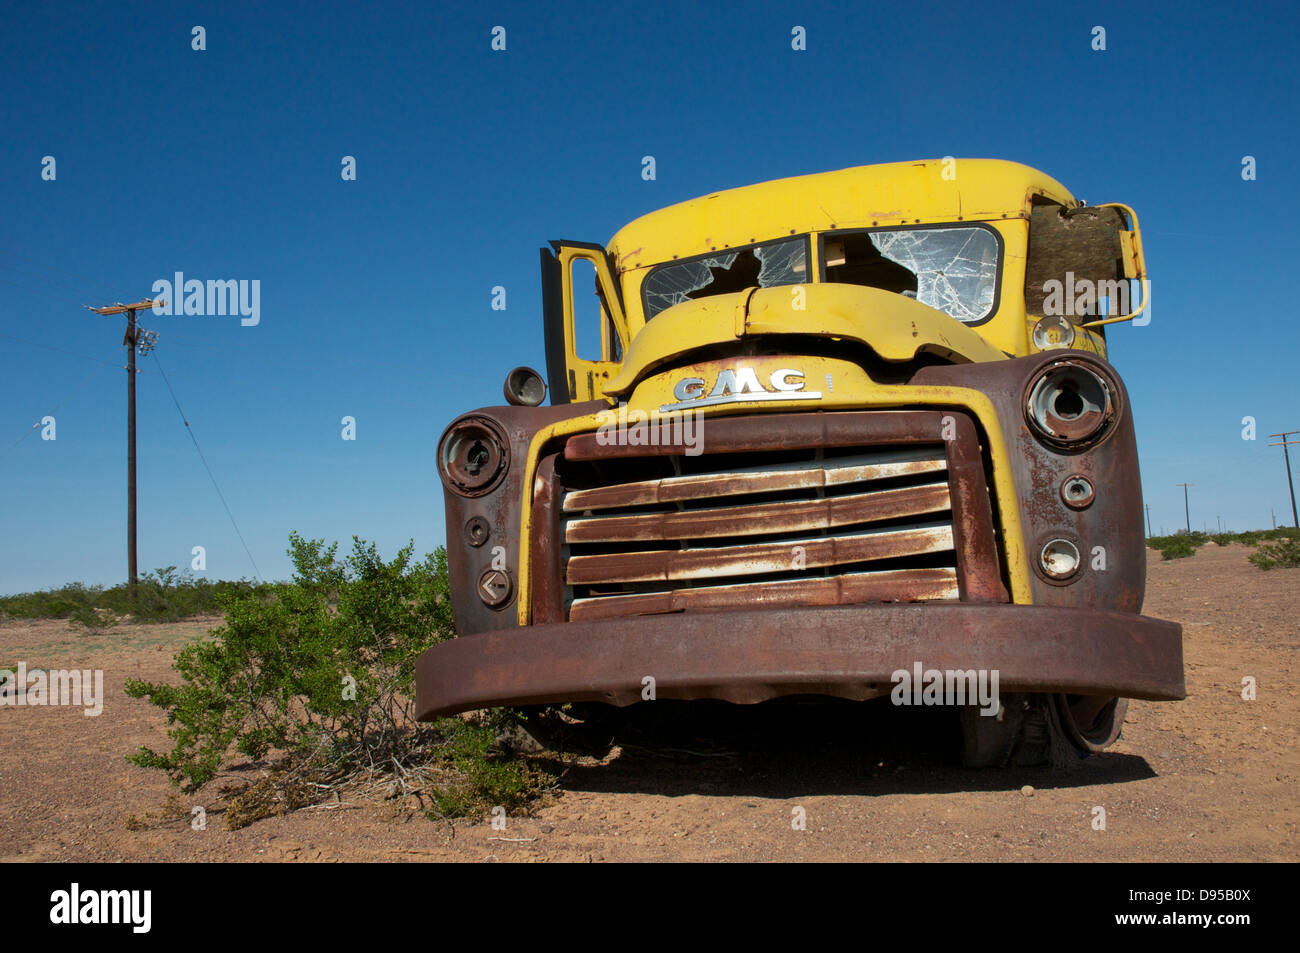 An iconic yellow US school bus lays abandoned in the deserts of Texas, USA. Stock Photo